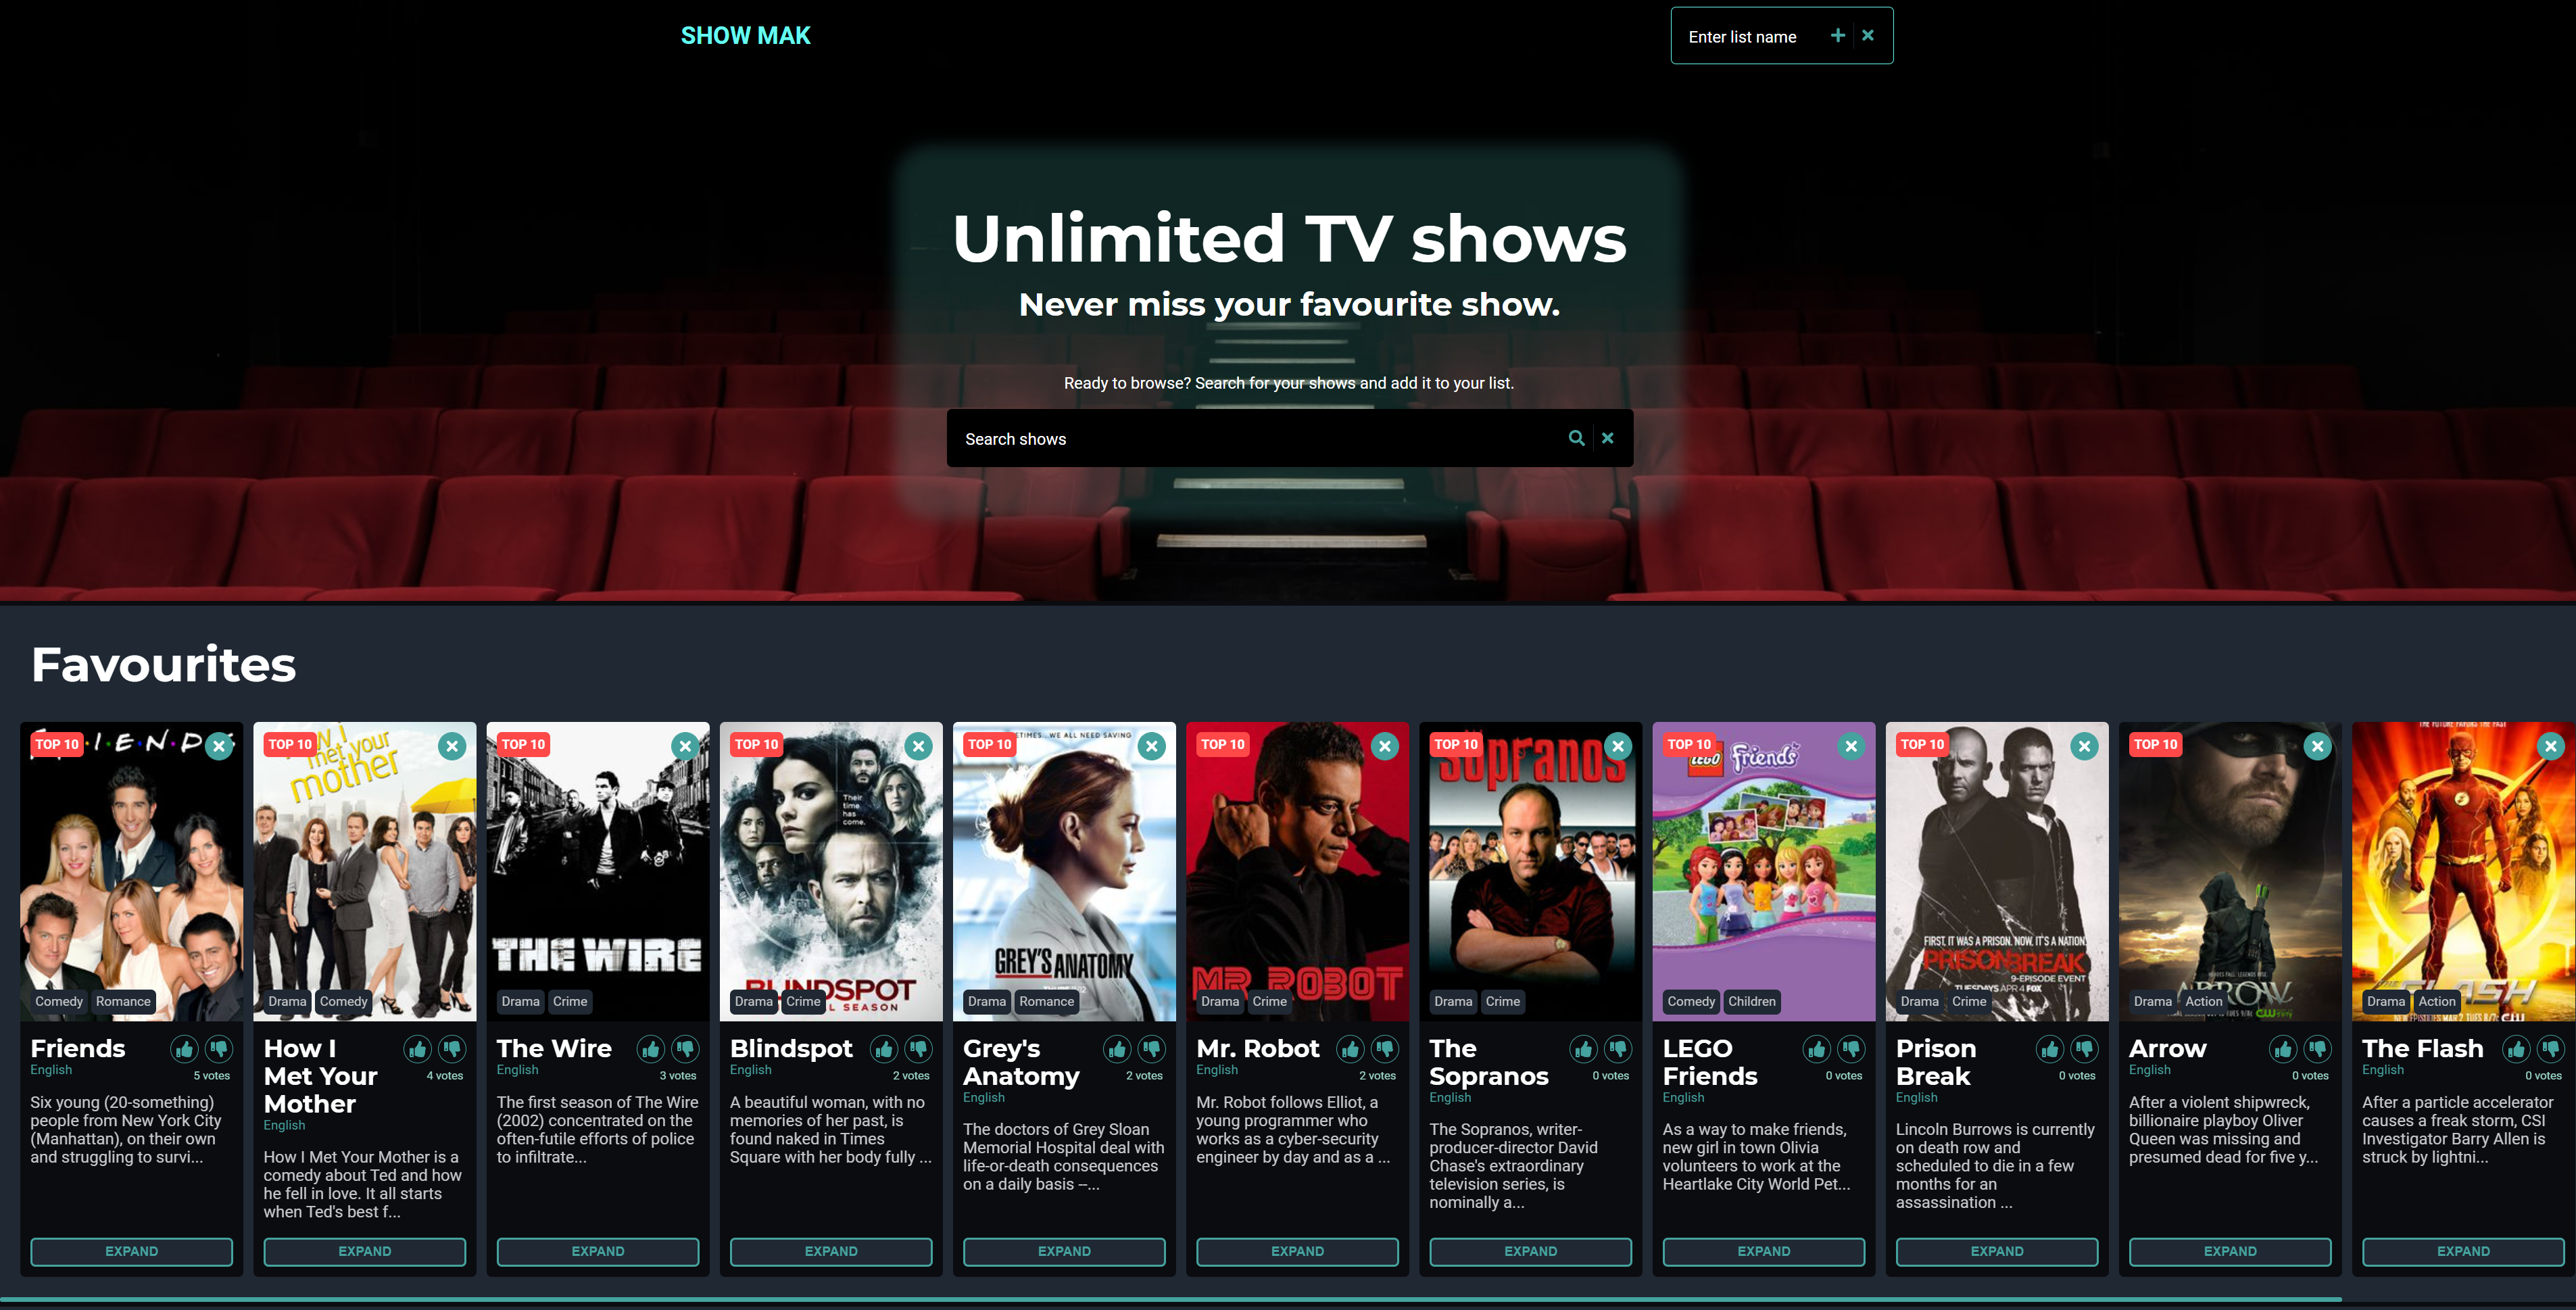 Desktop view of Show MAK, a website to search and follow your favourite TV shows created by the team of Kaunain Karmali, Abdulkadir Musse, and Mao Kitamura.